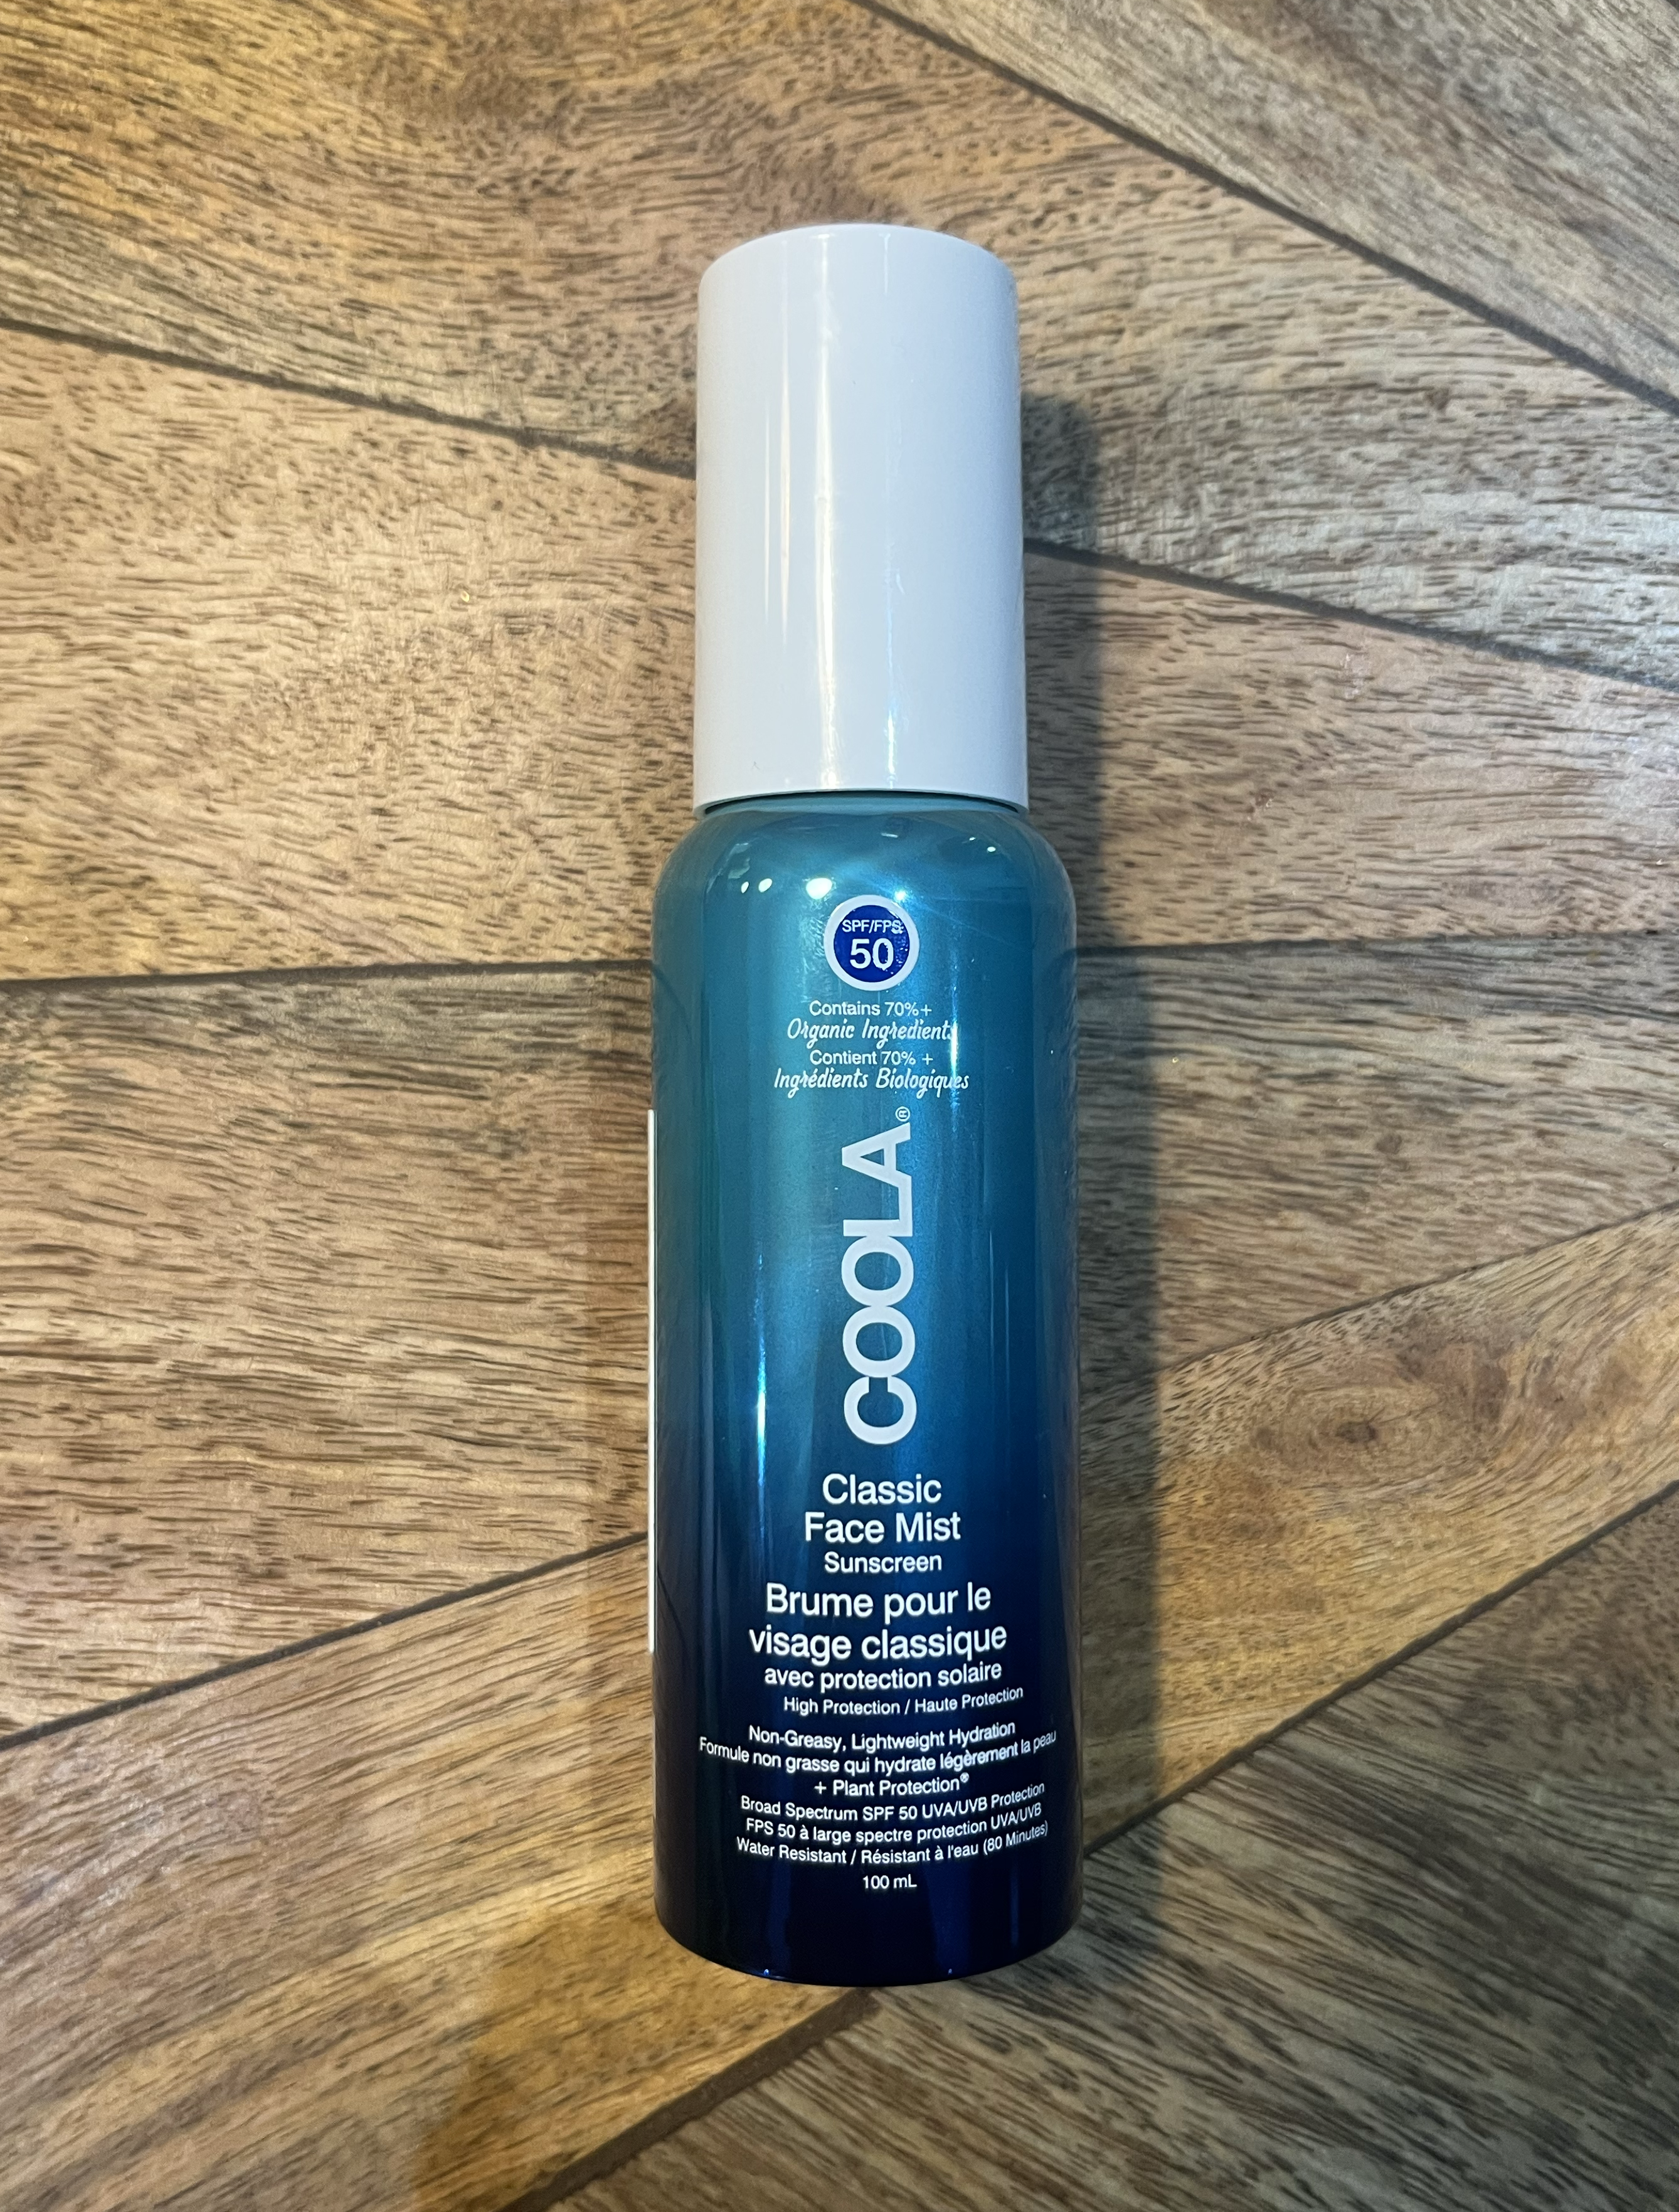 Refresh your skin with the Coola Classic Face Mist